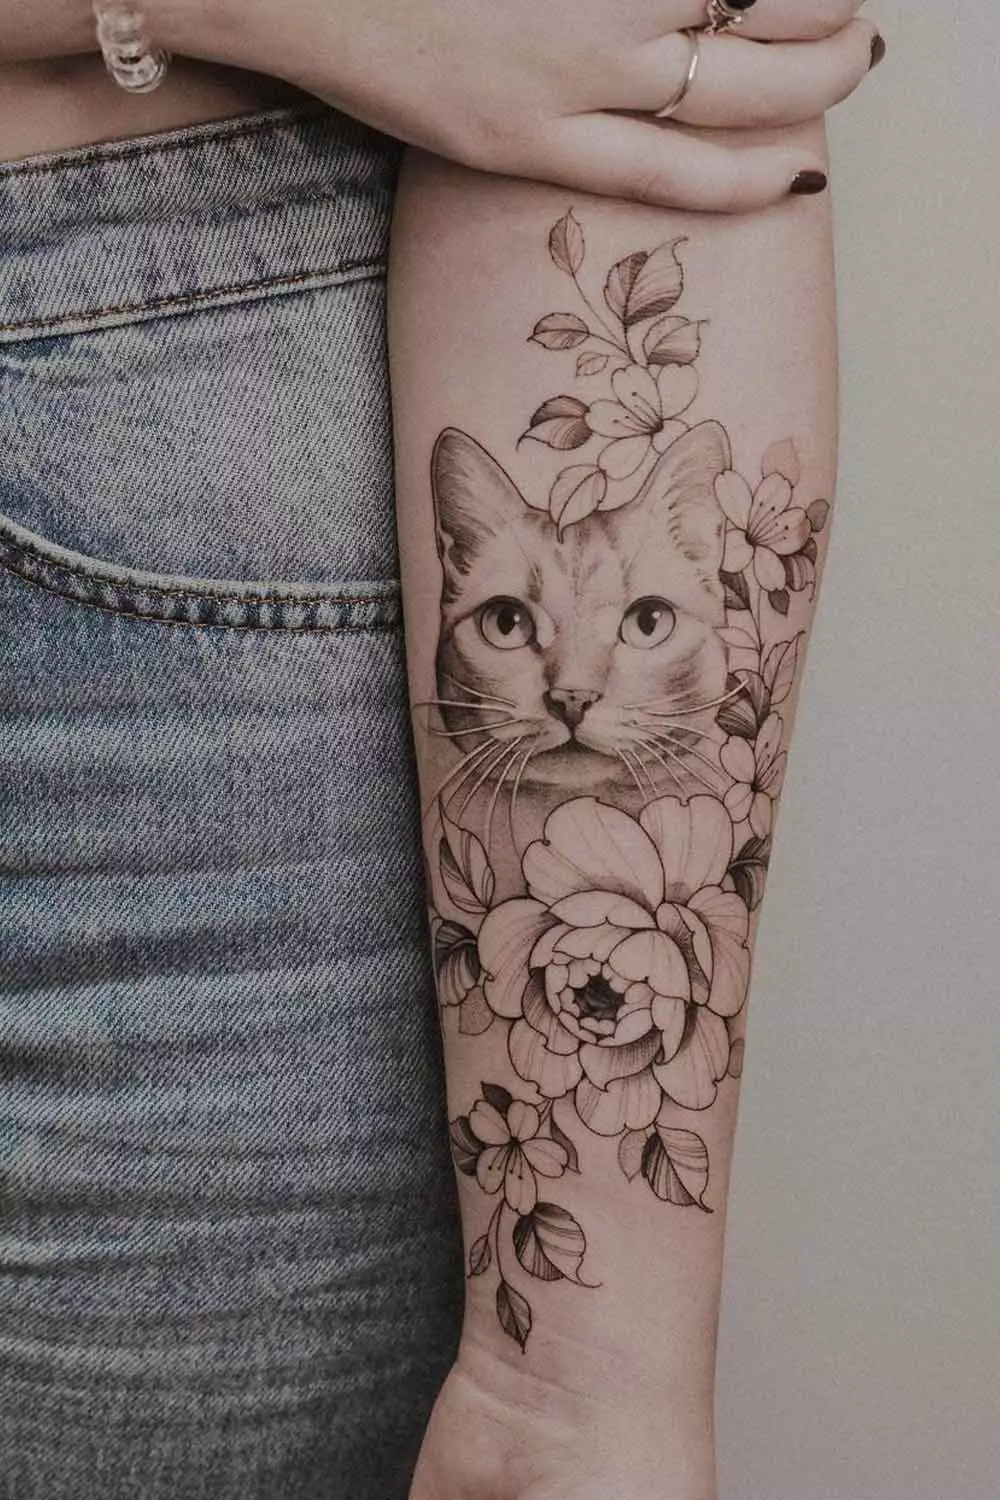 Purr-fectly Inked: 15 Adorable Cat Forearm Tattoos Ideas